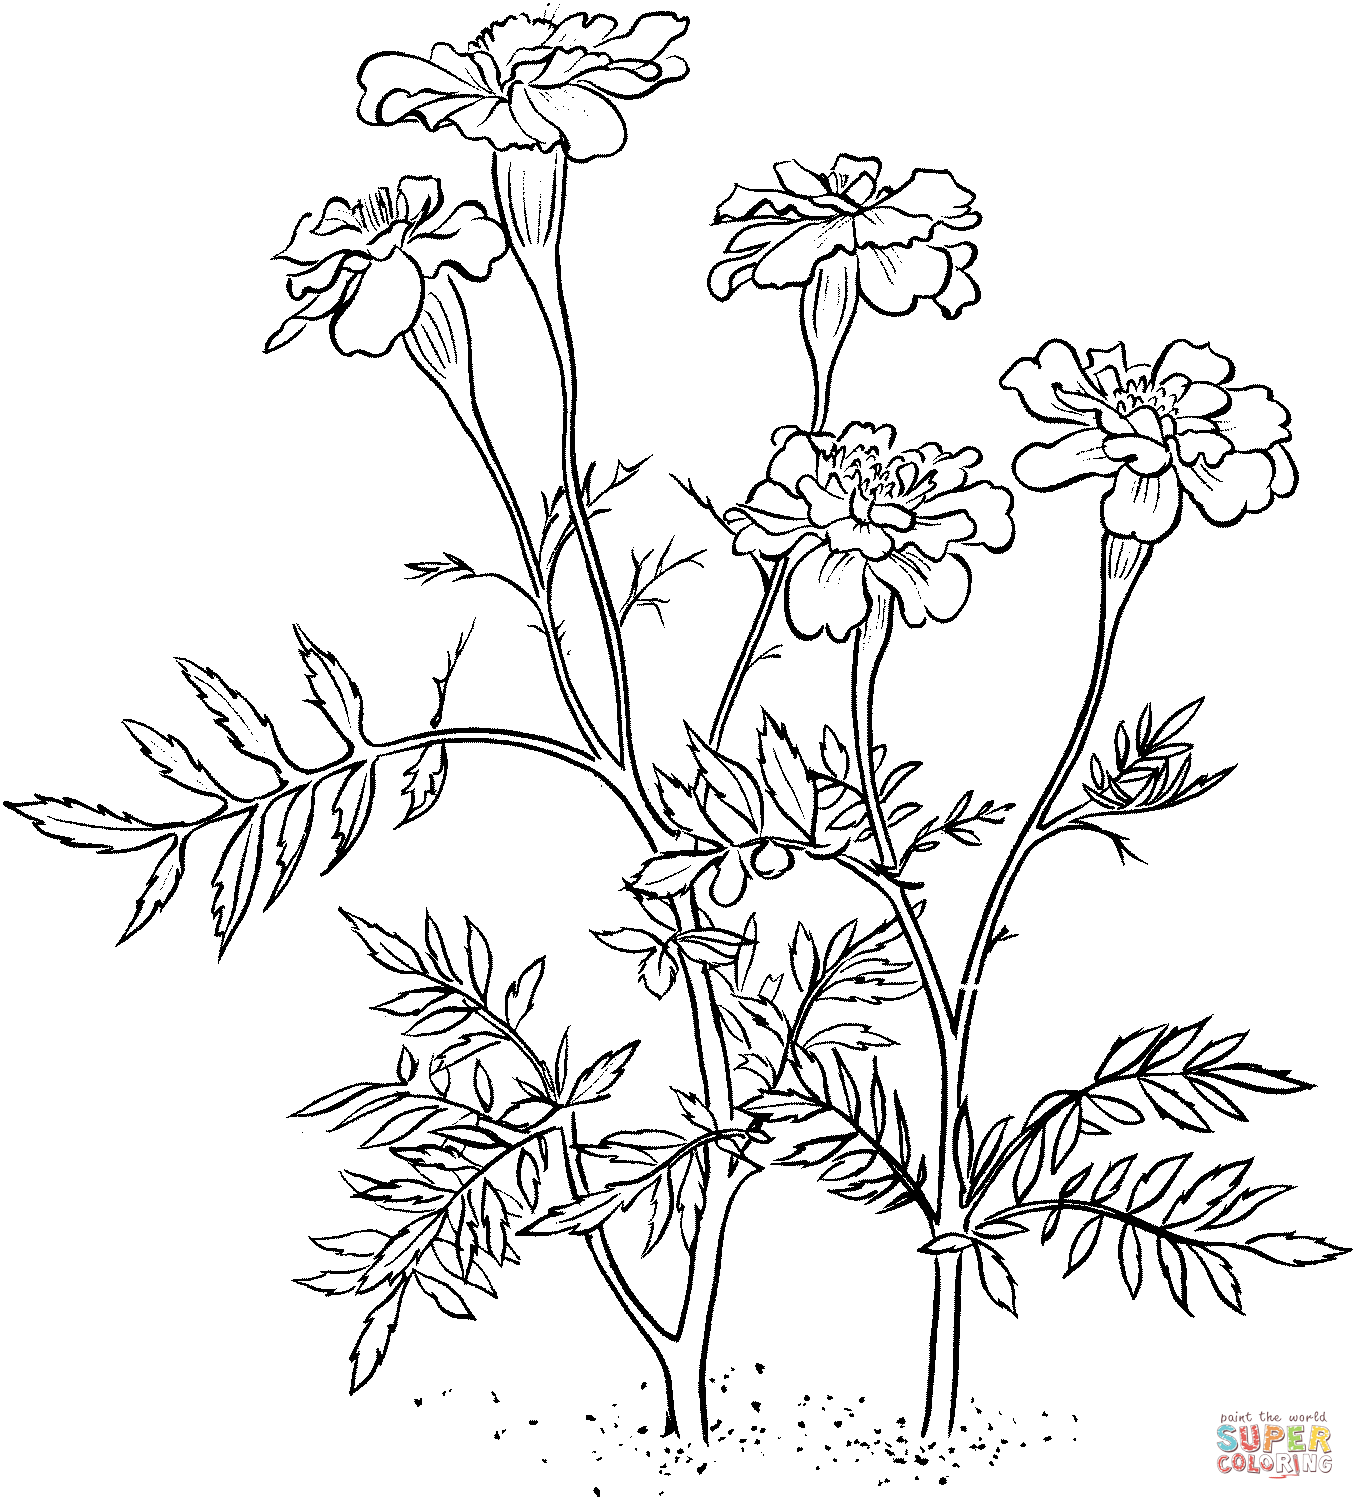 Marigolds coloring pages | Free Coloring Pages